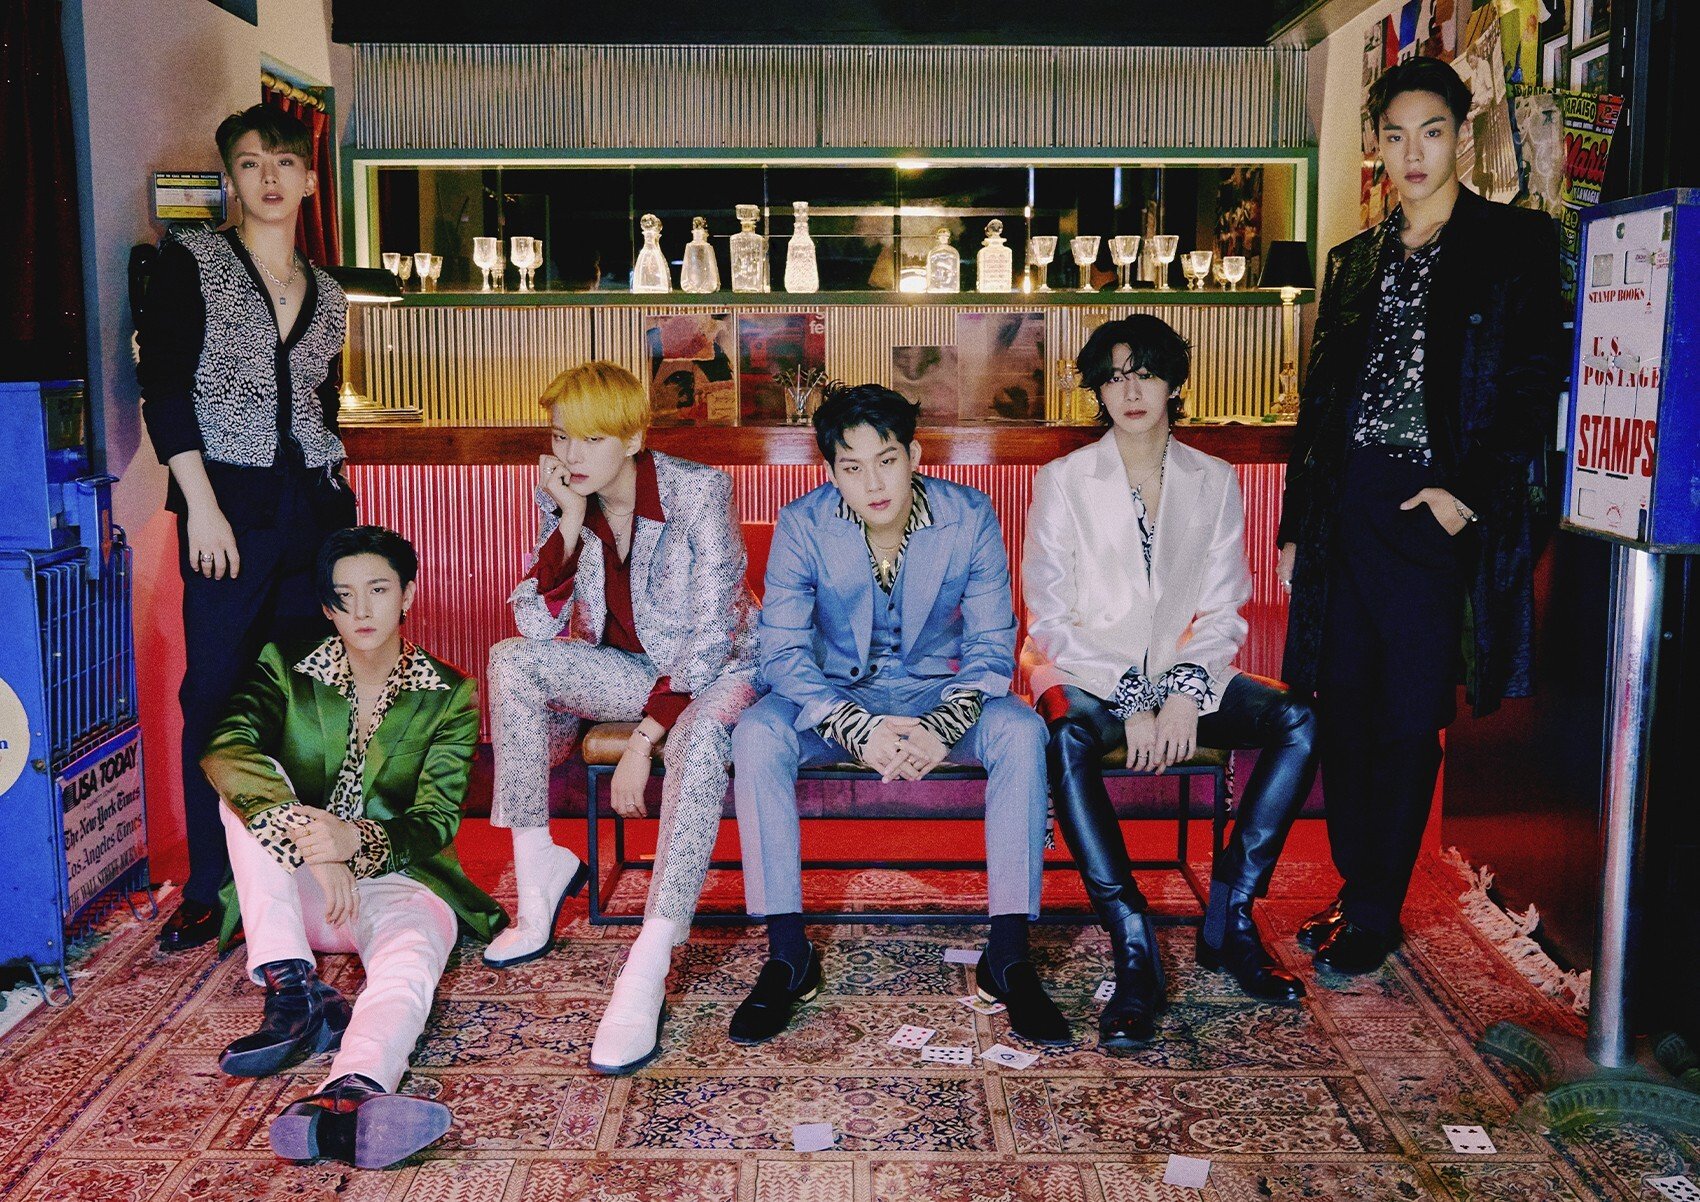 K-pop boy band Monsta X released their new album Fatal Love this week. They told the Post how it was put together despite the difficulties of coronavirus. Photo: Starship Entertainment